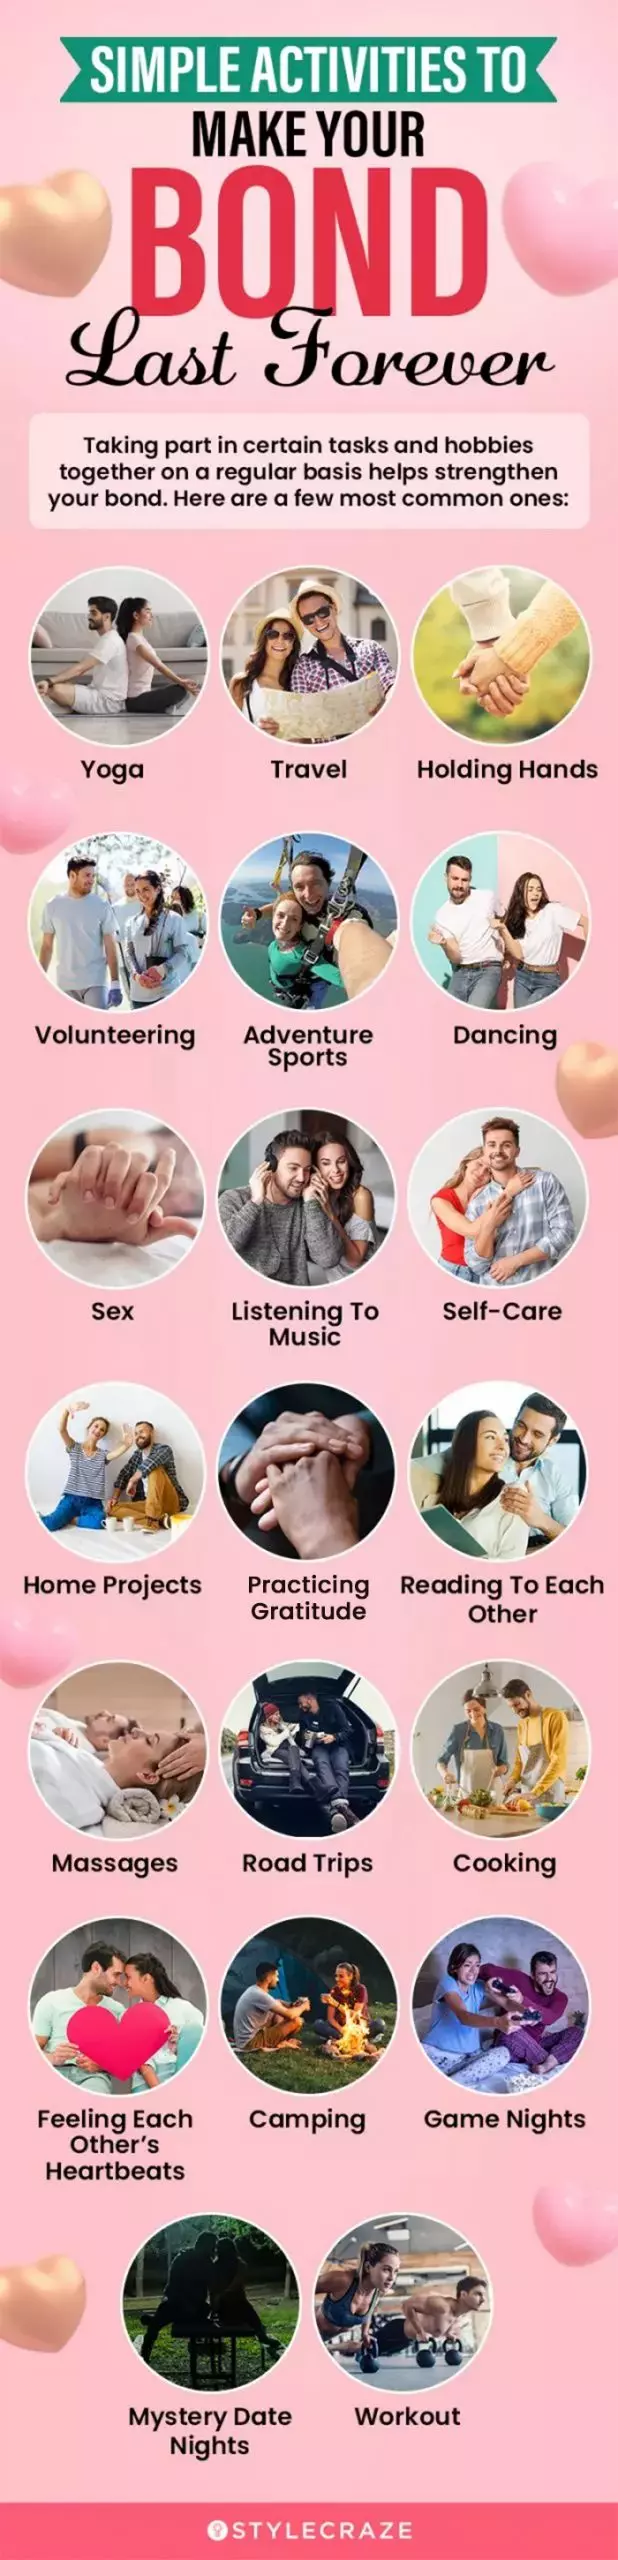 simple activities to make your bond last forever (infographic)